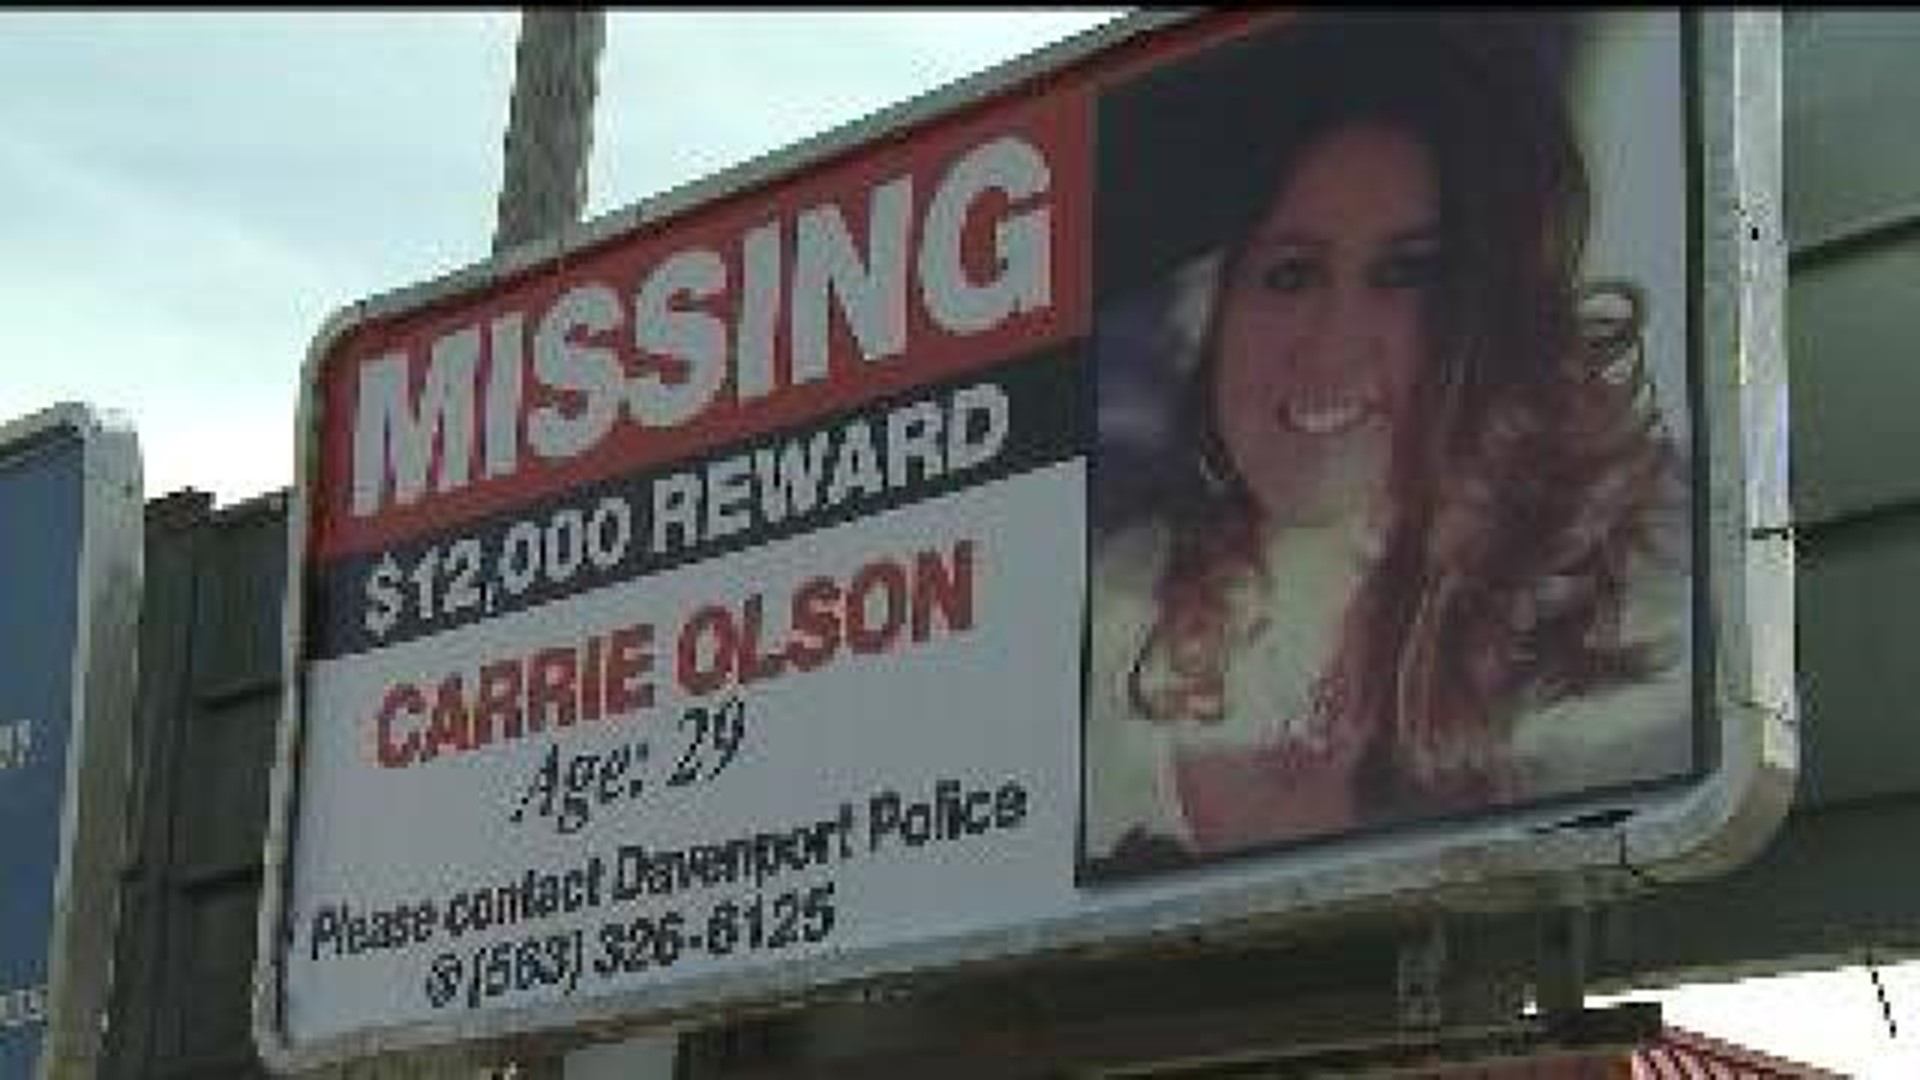 Billboards posted to help find Carrie Olson